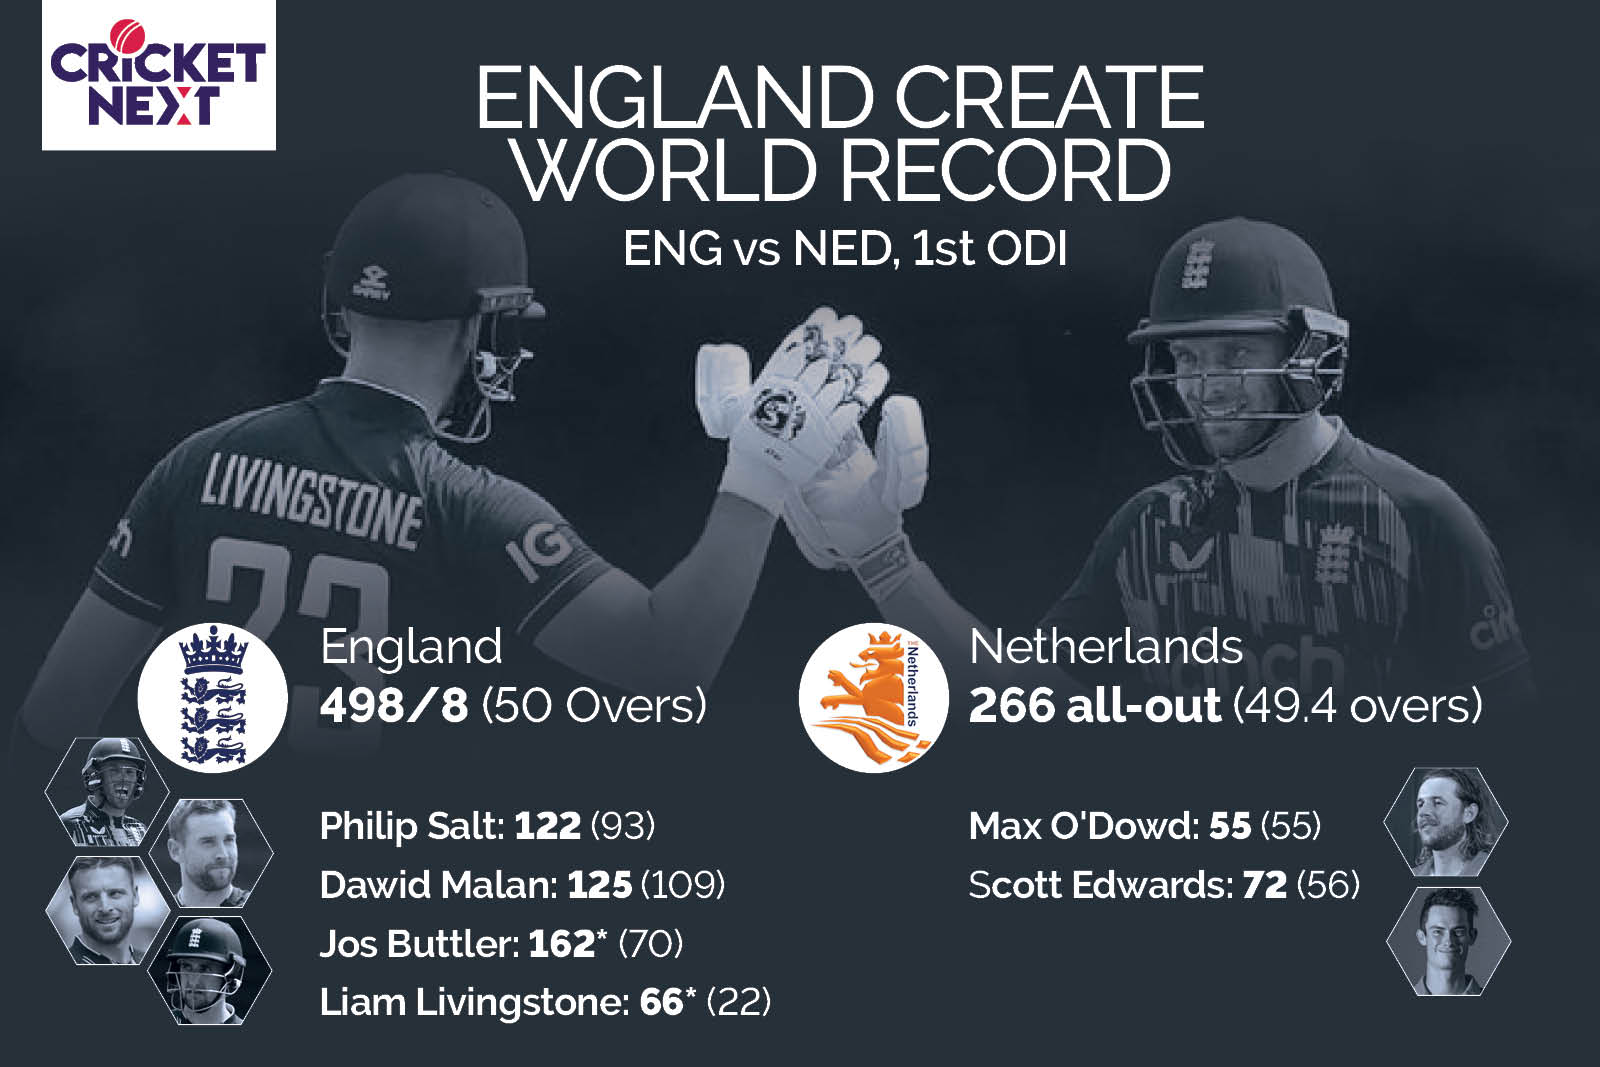 England sets world record for highest total in ODIs